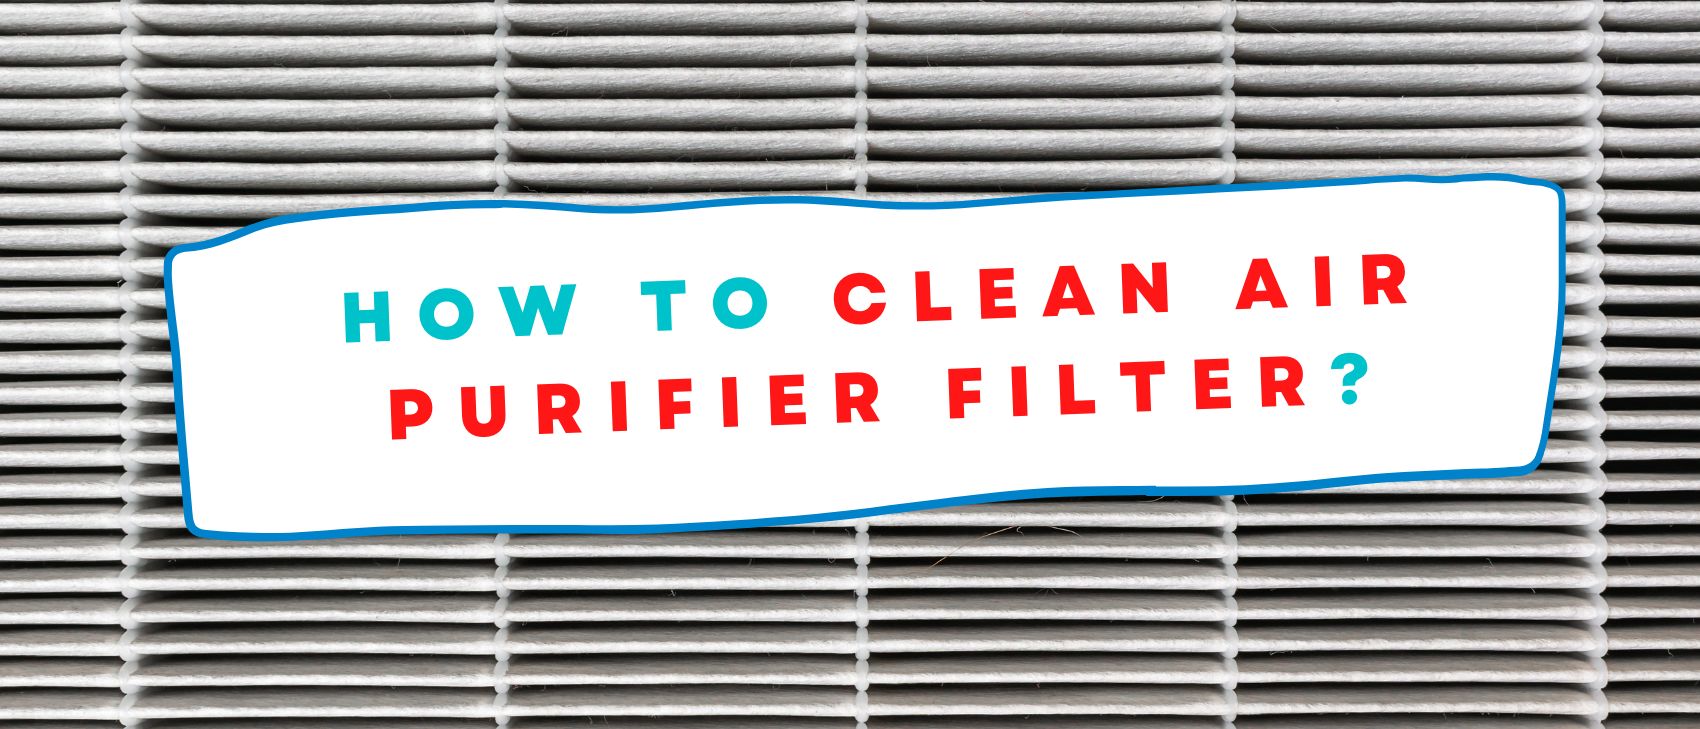 How to Clean Air Purifier Filter?